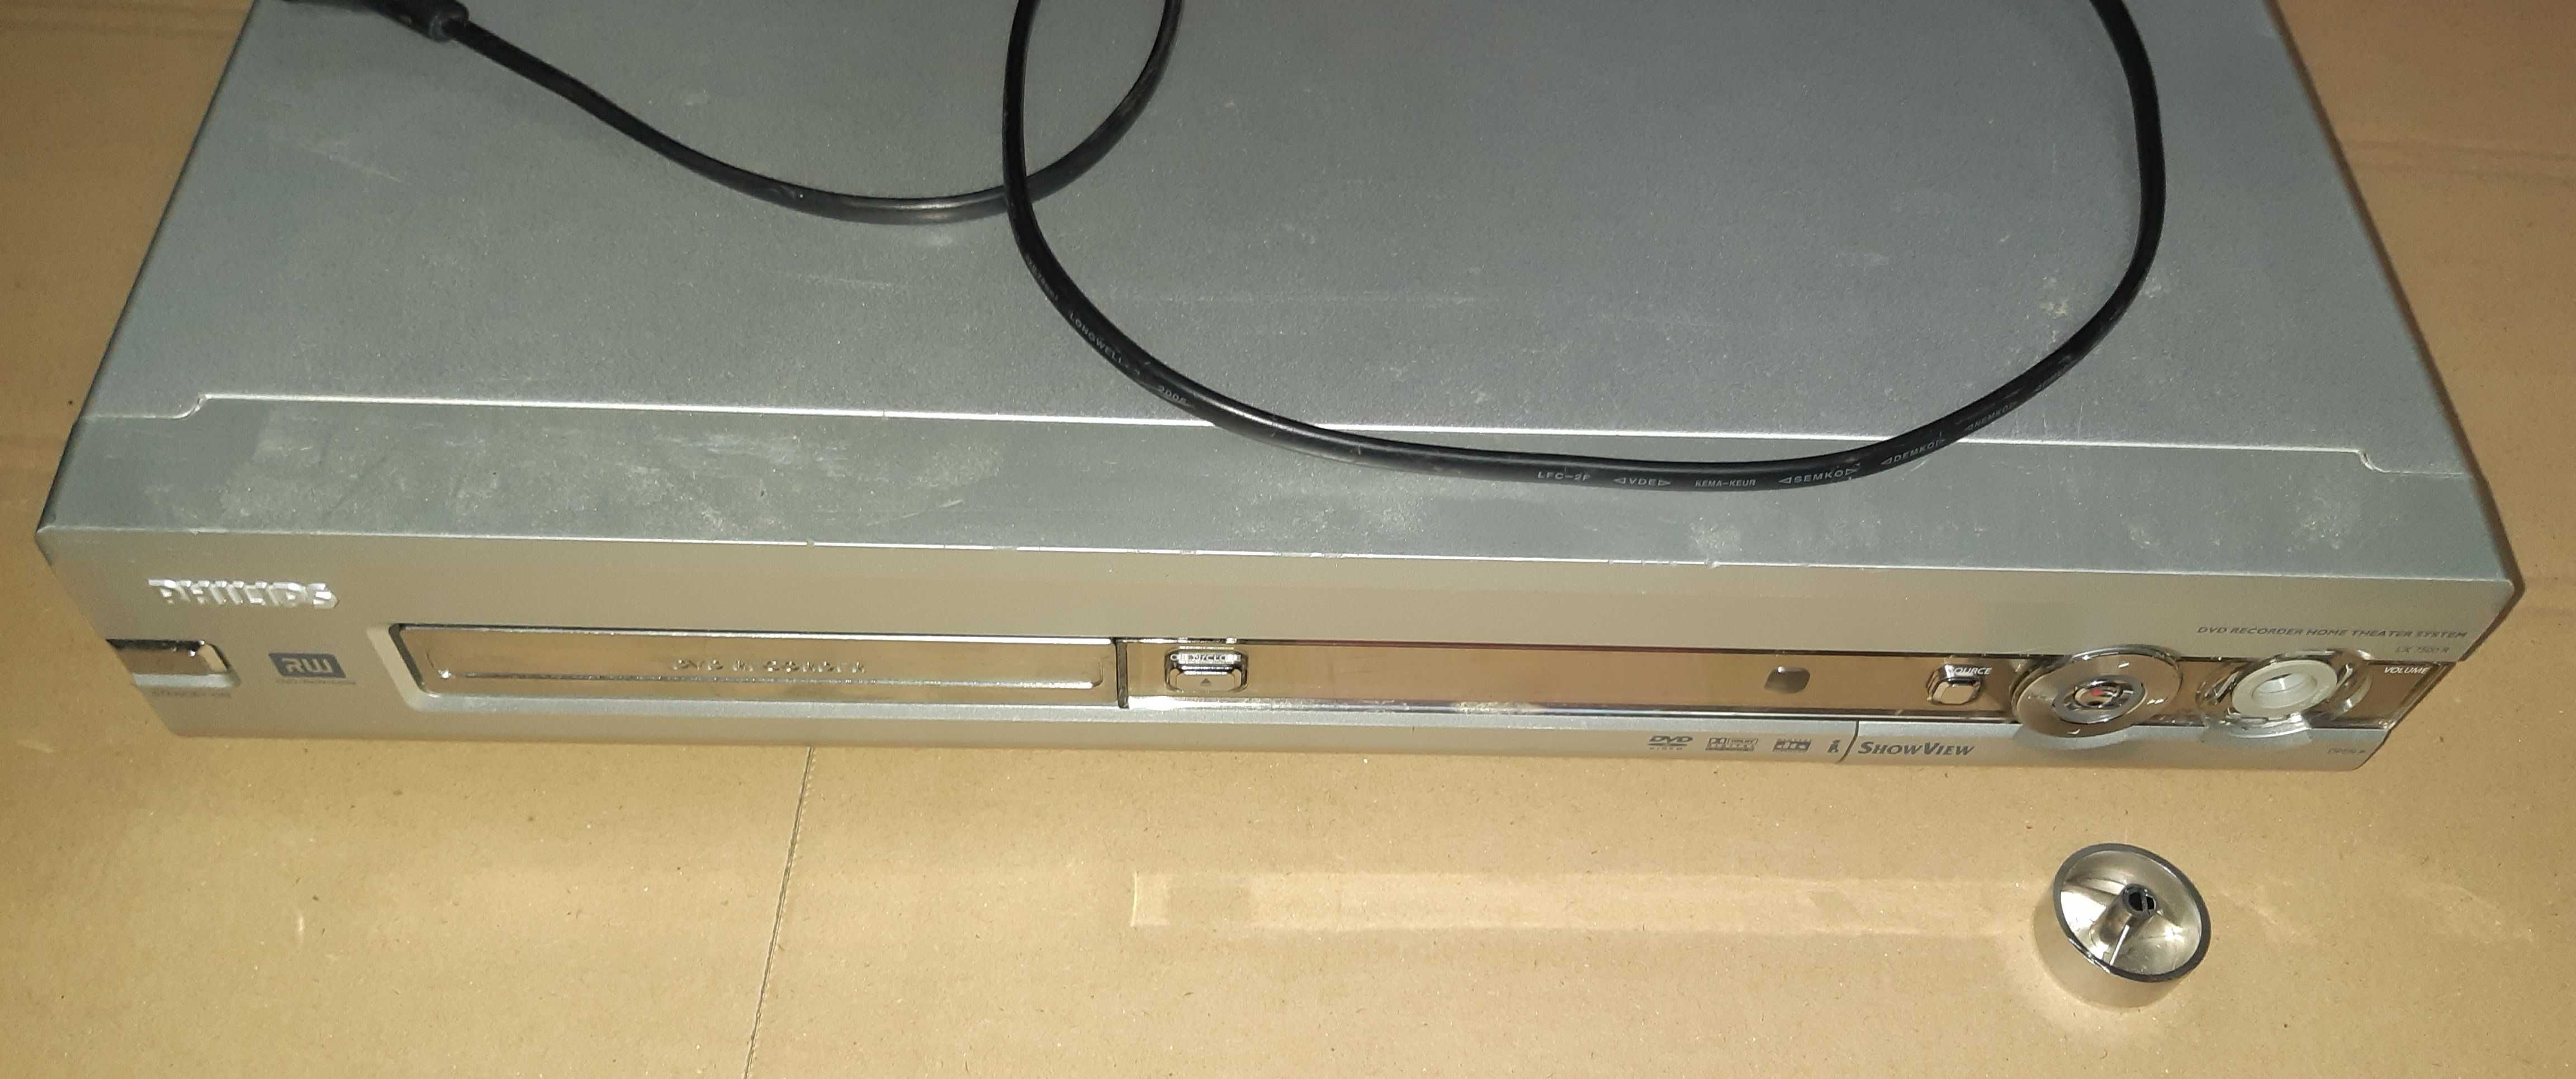 DVD Recorder Philips LX 7500 R за Домашно Кино